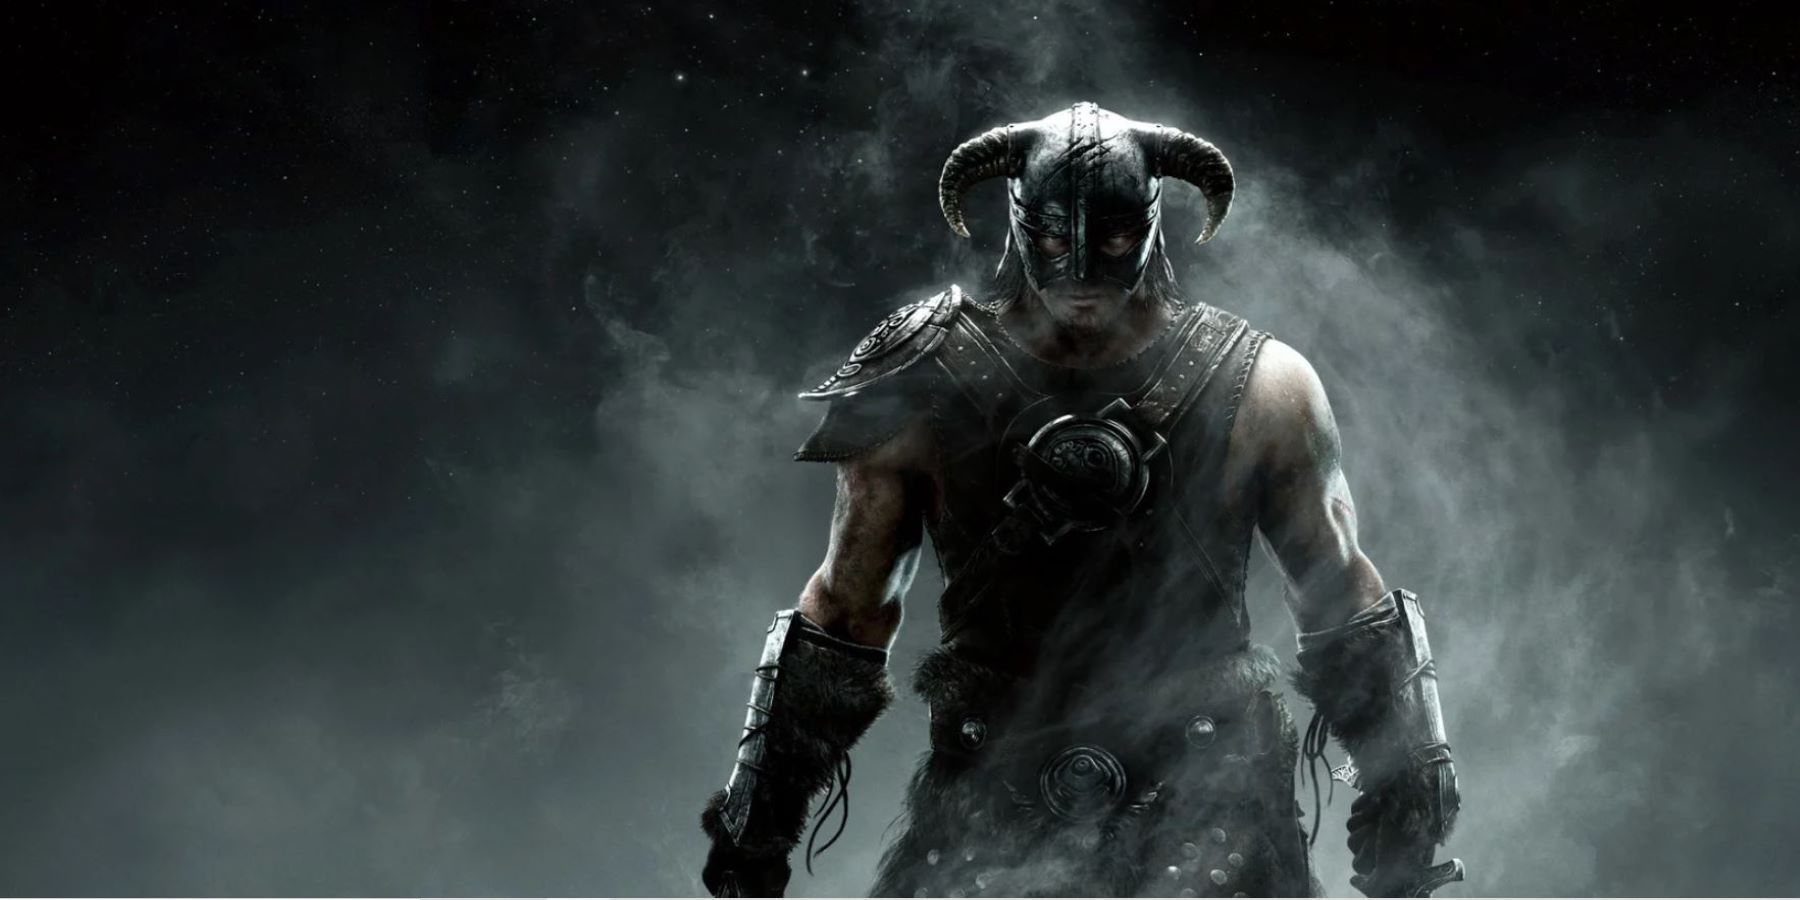 skyrim player fully completed the game in 700 hours